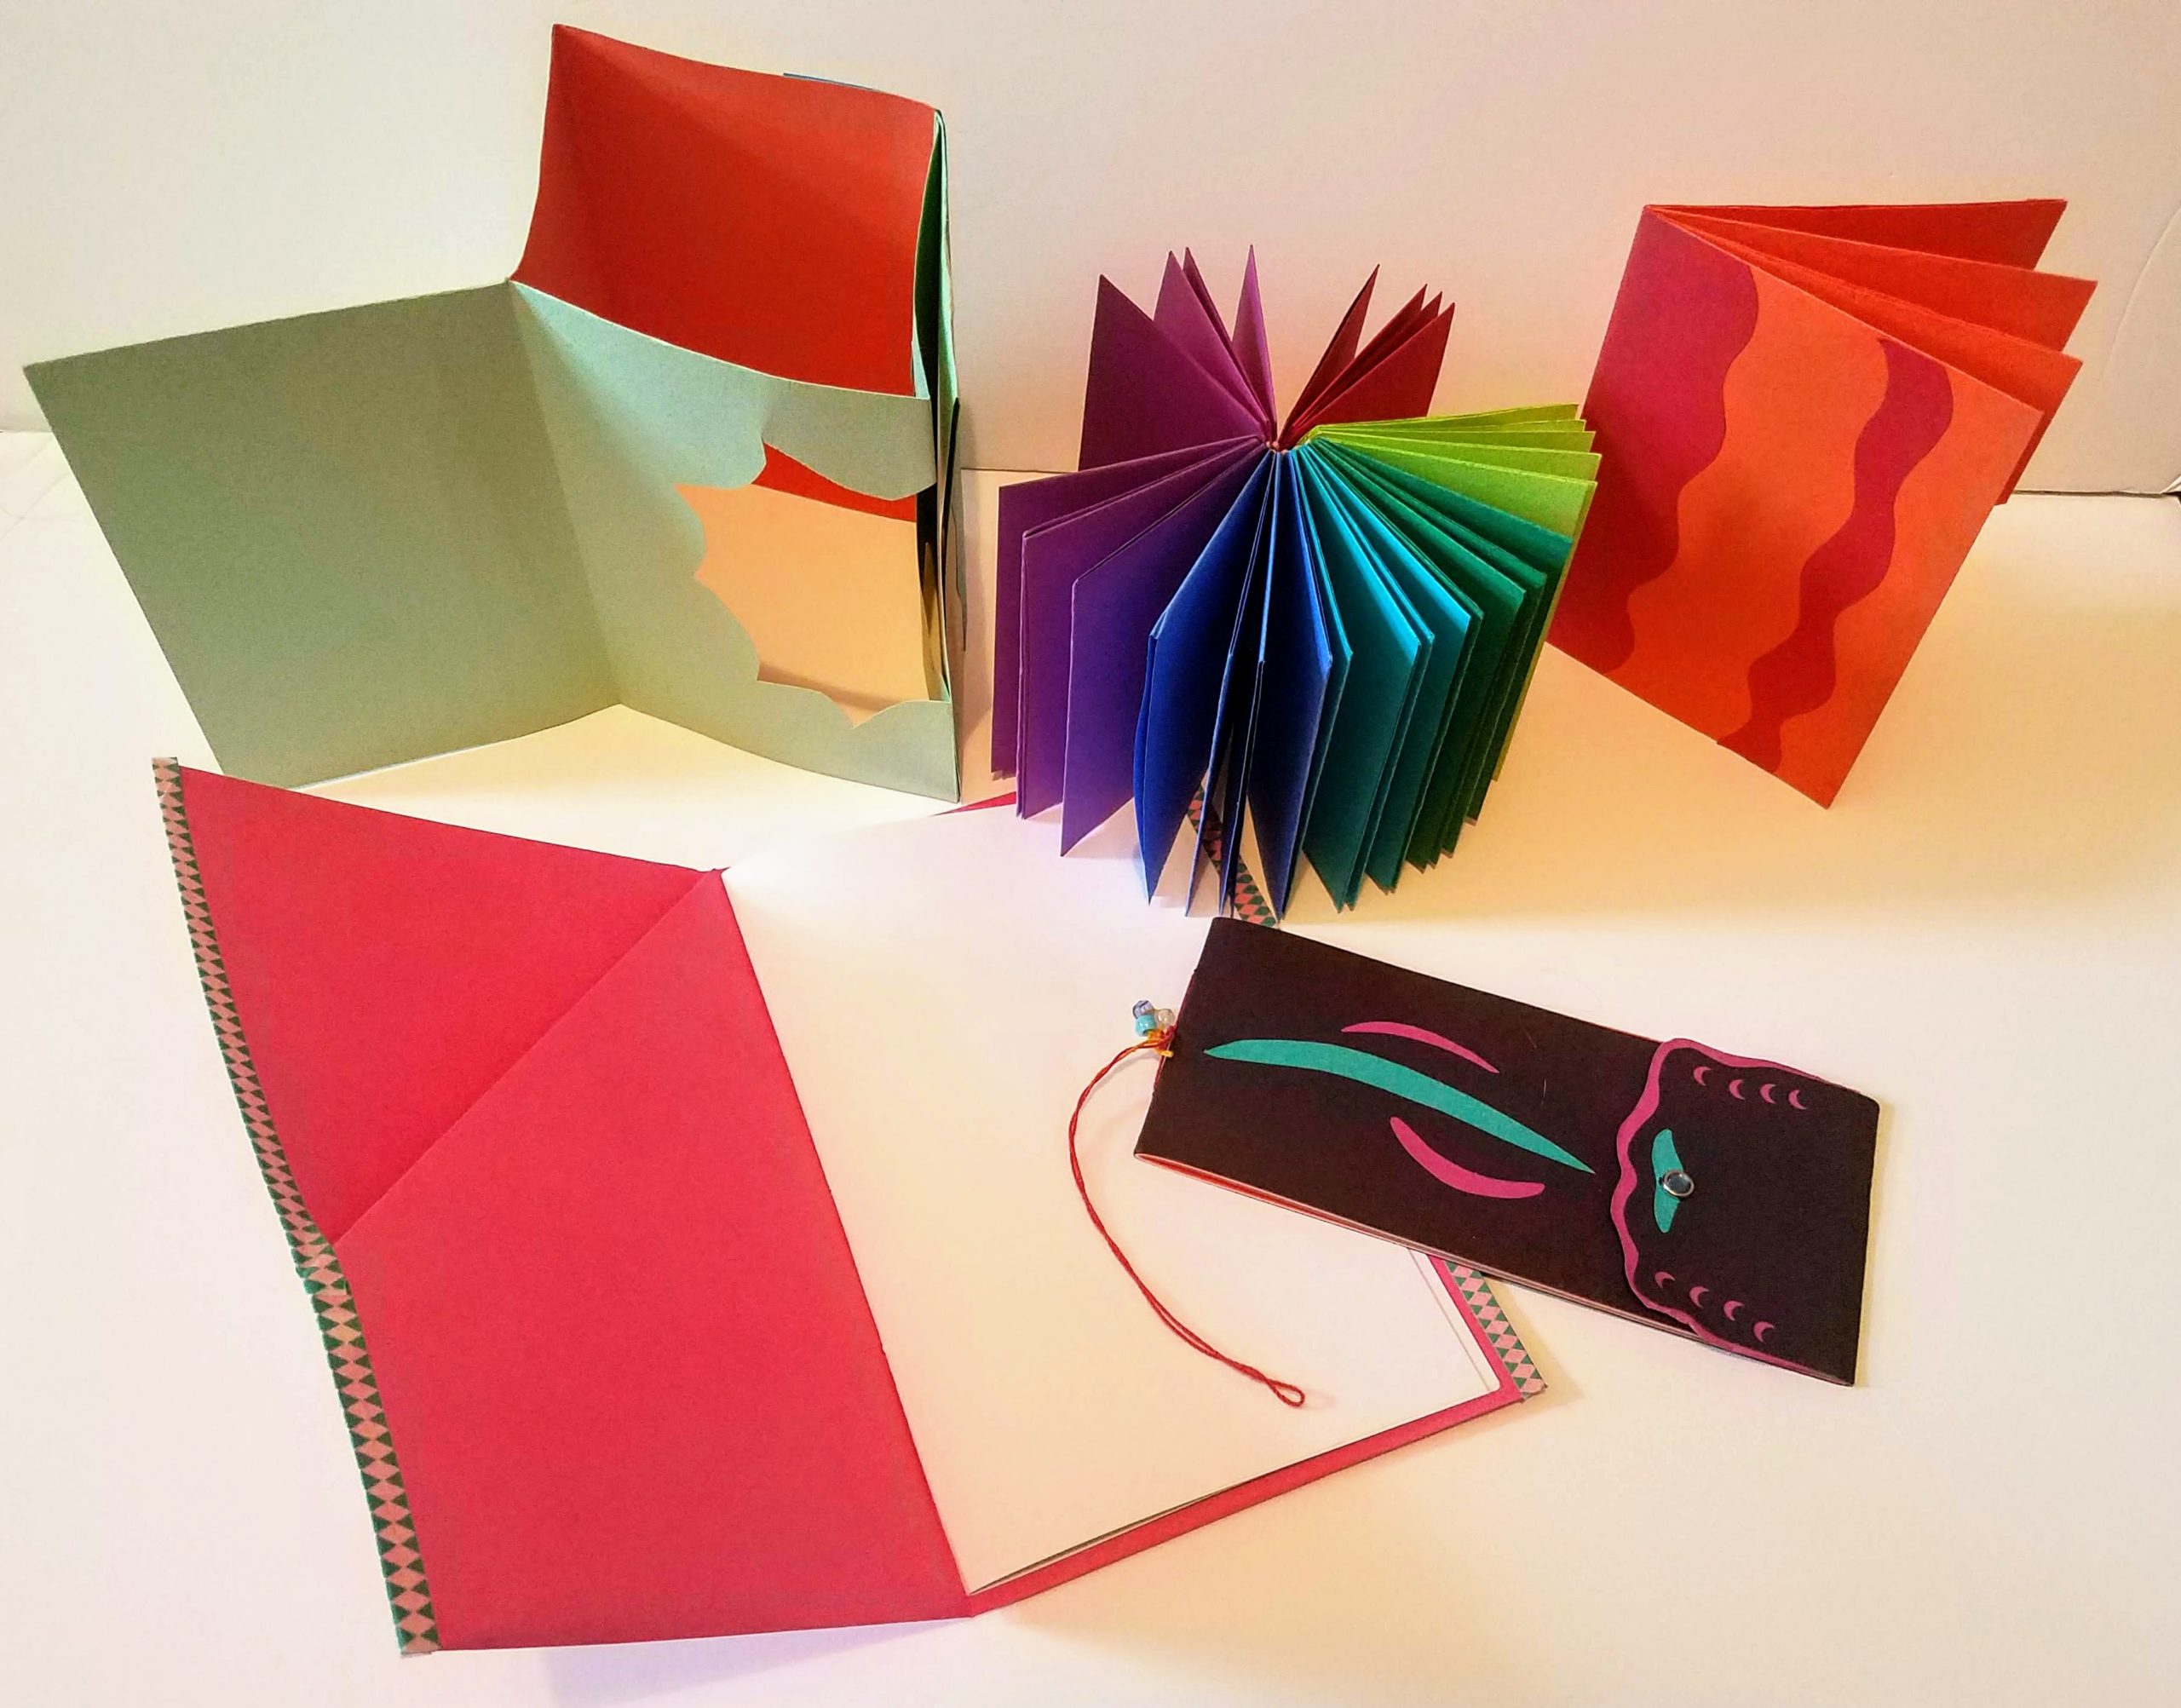 A series of five books made of colorful cardstock papers.